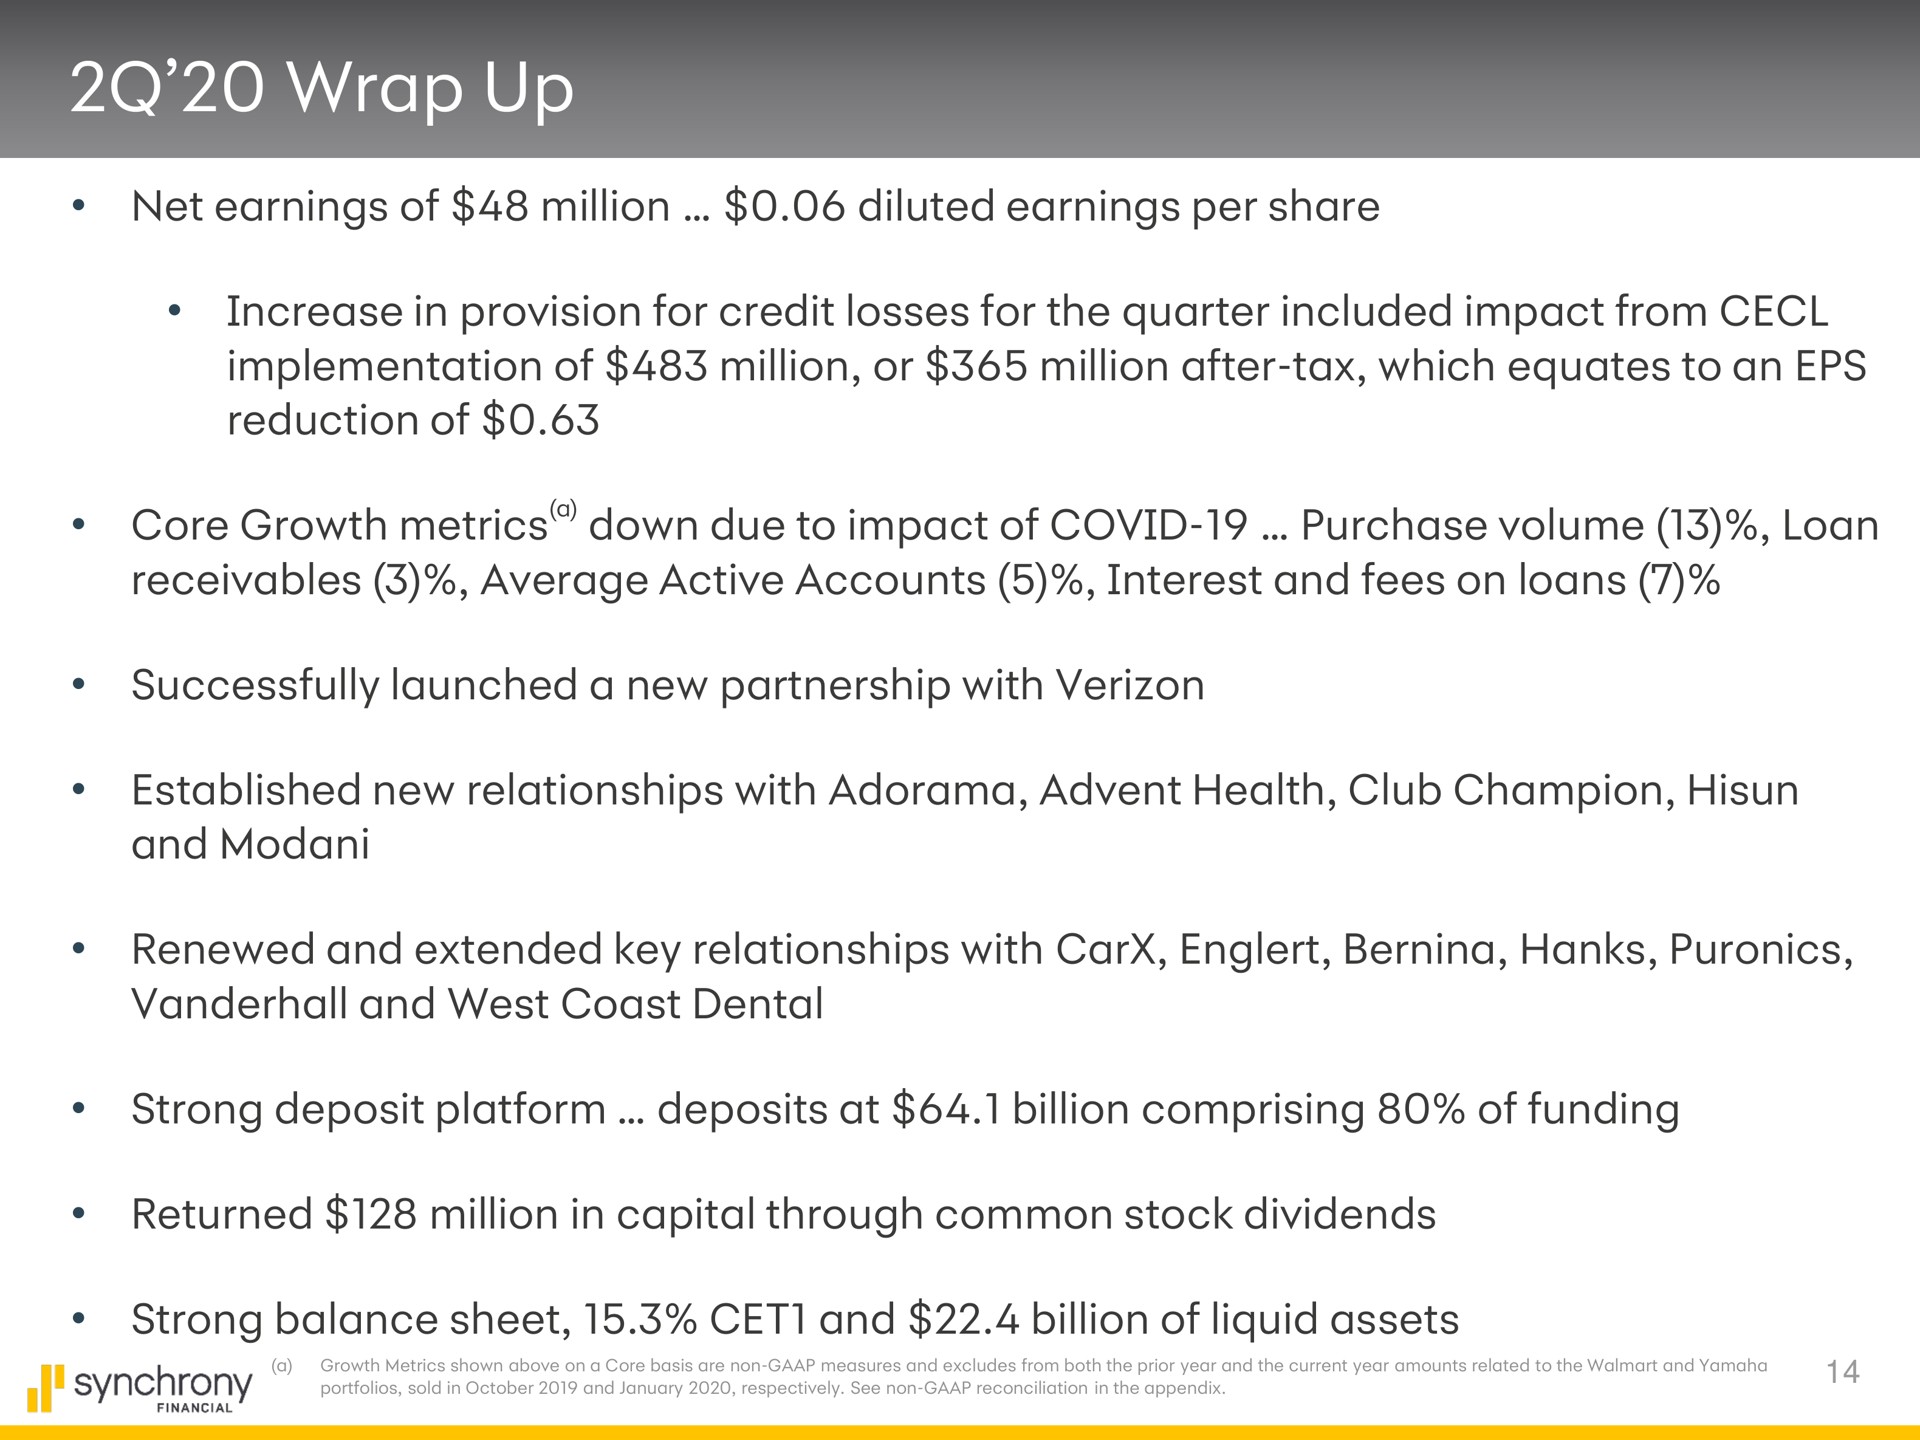 wrap up net earnings of million diluted earnings per share increase in provision for credit losses for the quarter included impact from implementation of million or million after tax which equates to an reduction of core growth metrics down due to impact of covid purchase volume loan receivables average active accounts interest and fees on loans successfully launched a new partnership with strong deposit platform deposits at billion comprising of funding returned million in capital through common stock dividends strong balance sheet and billion of liquid assets | Synchrony Financial